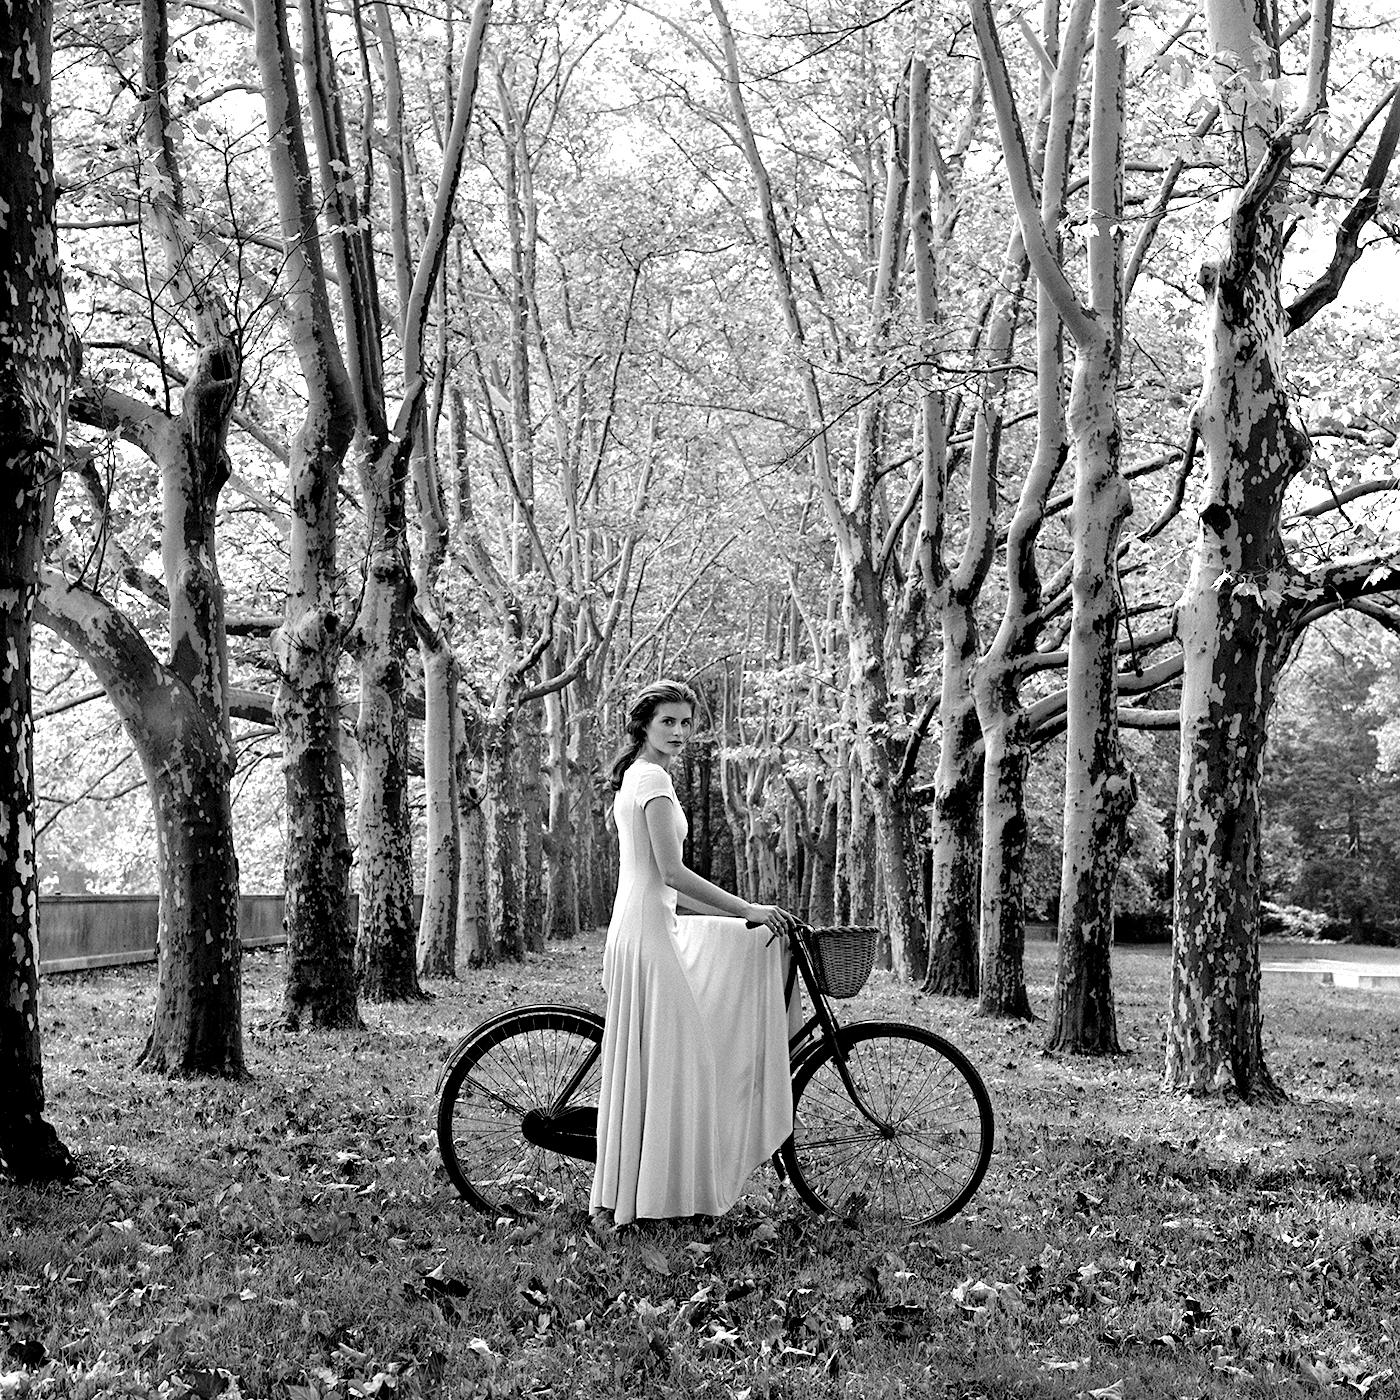 Rodney Smith Black and White Photograph - Anika on Bicycle, Long Island, New York - 40 x 40 inches